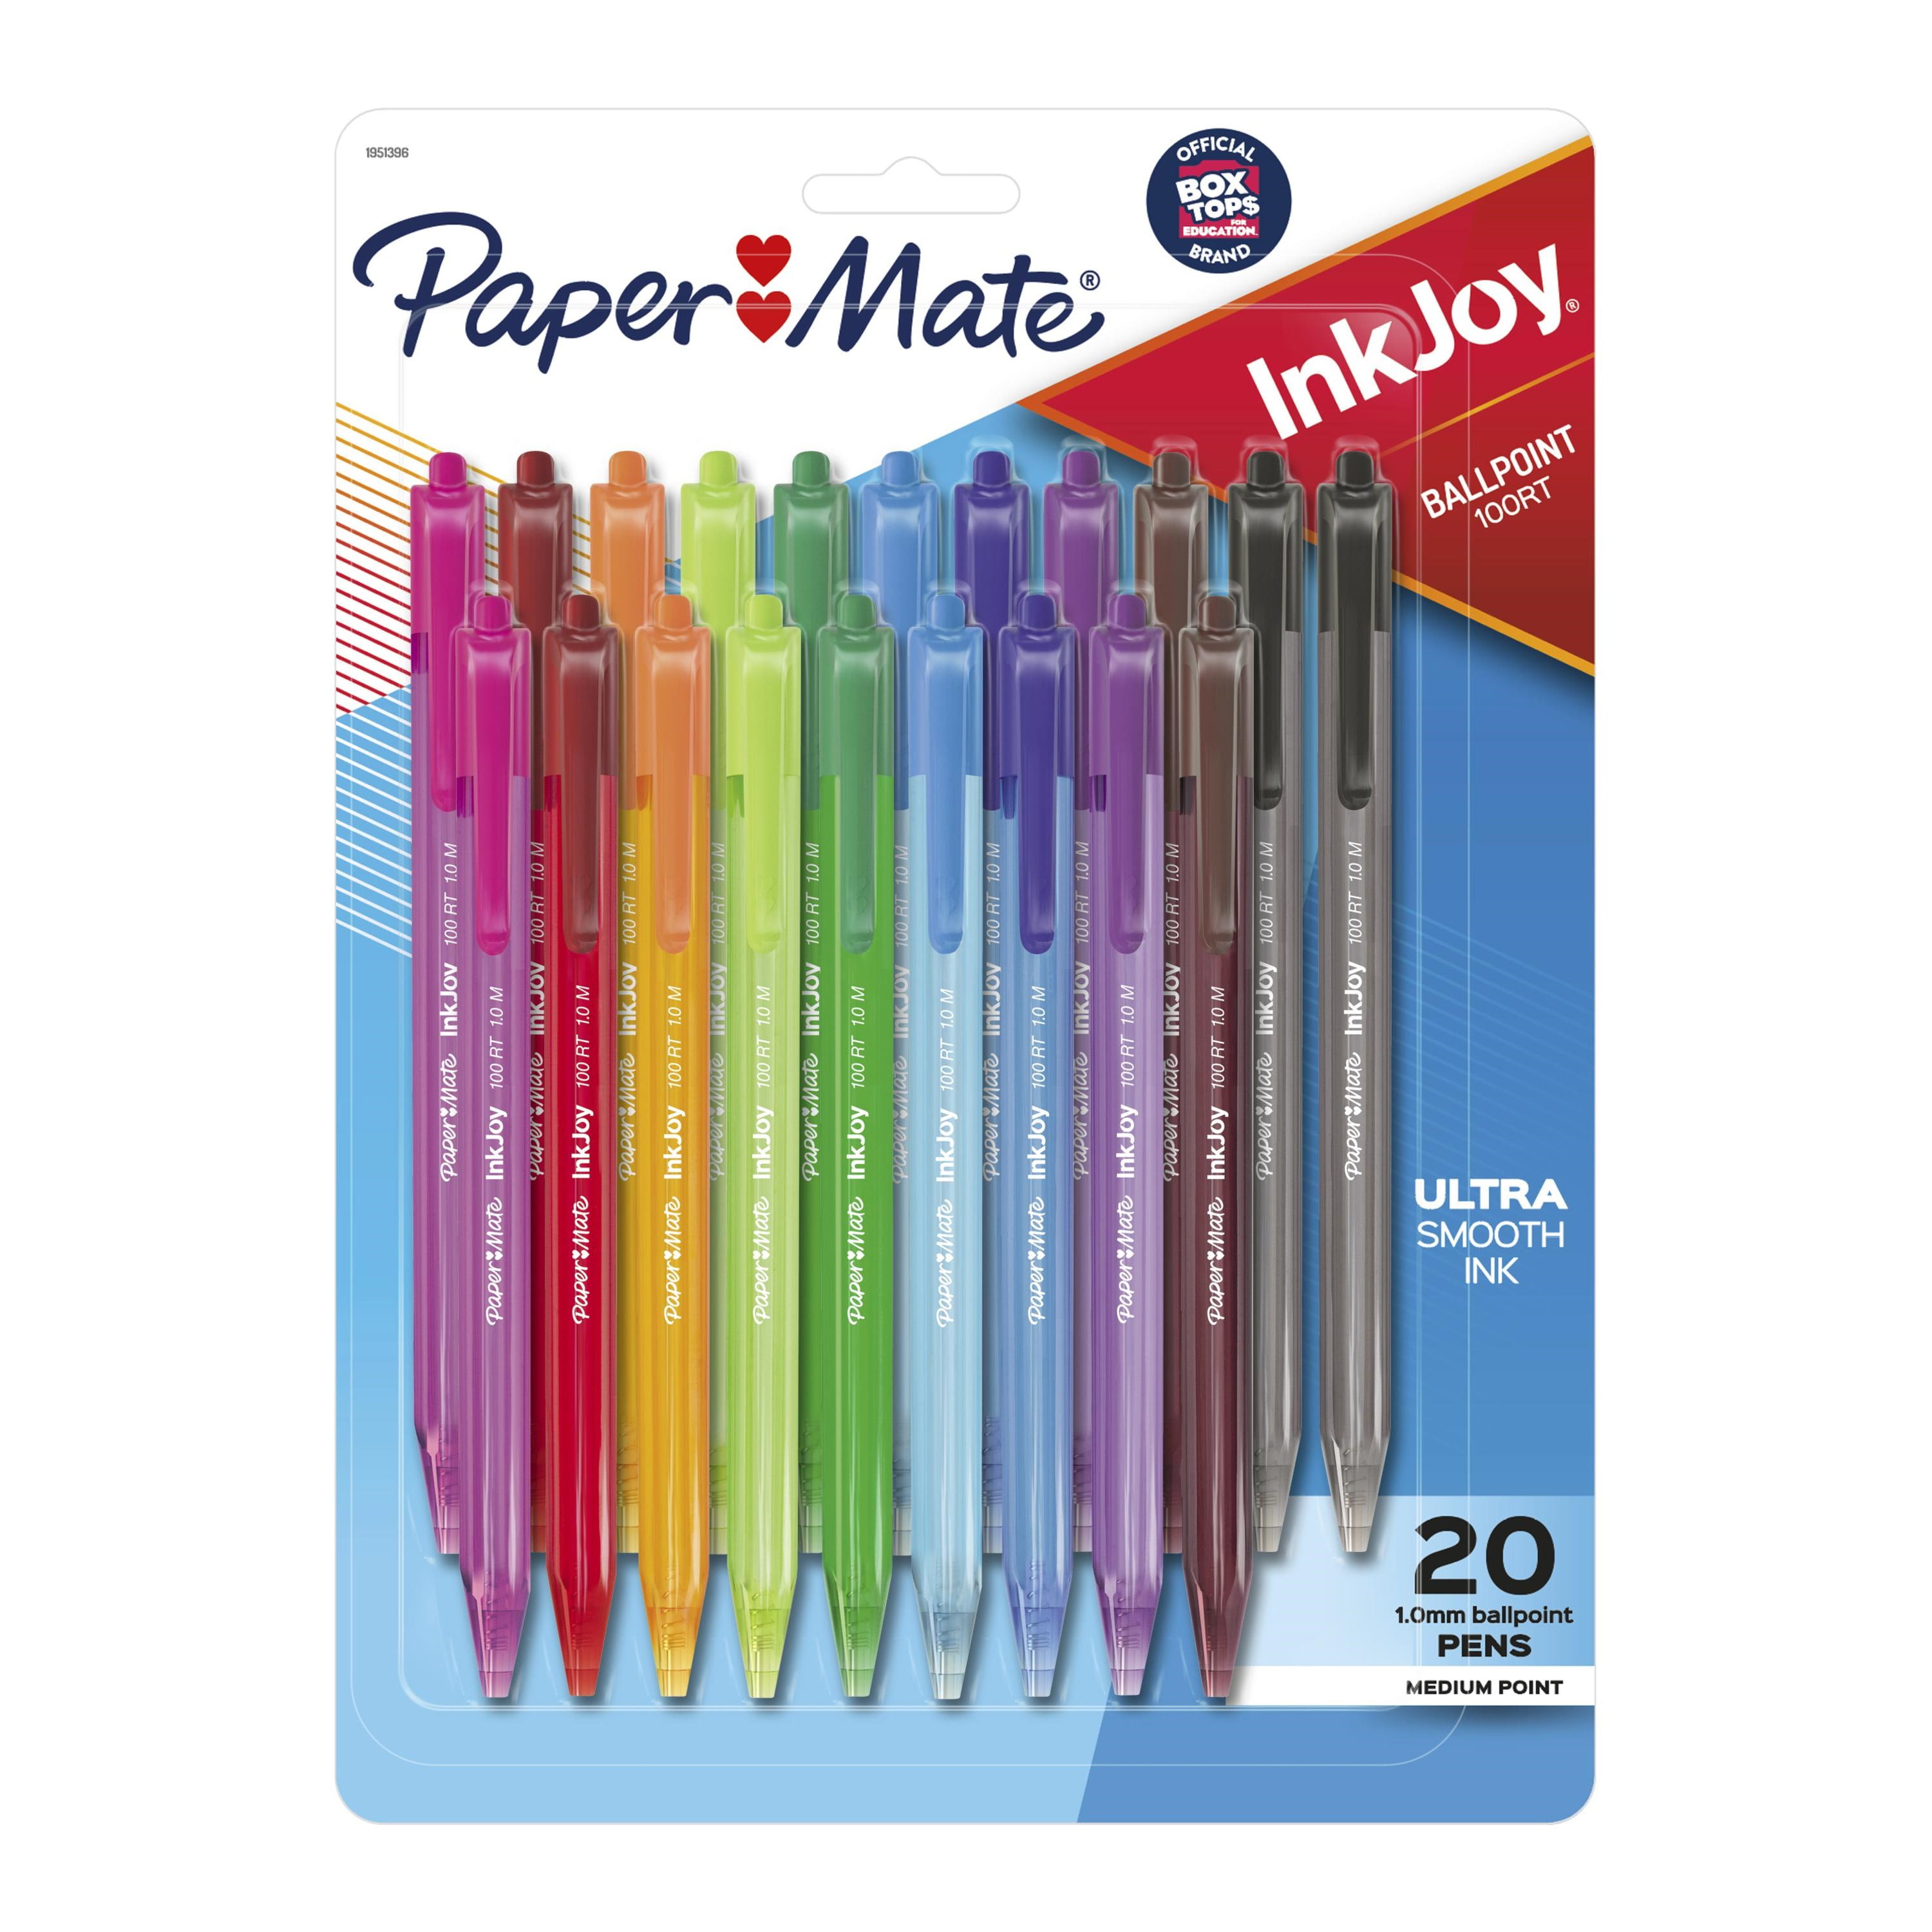 Papermate Inkjoy Ballpoint Pens  Free Shipping 